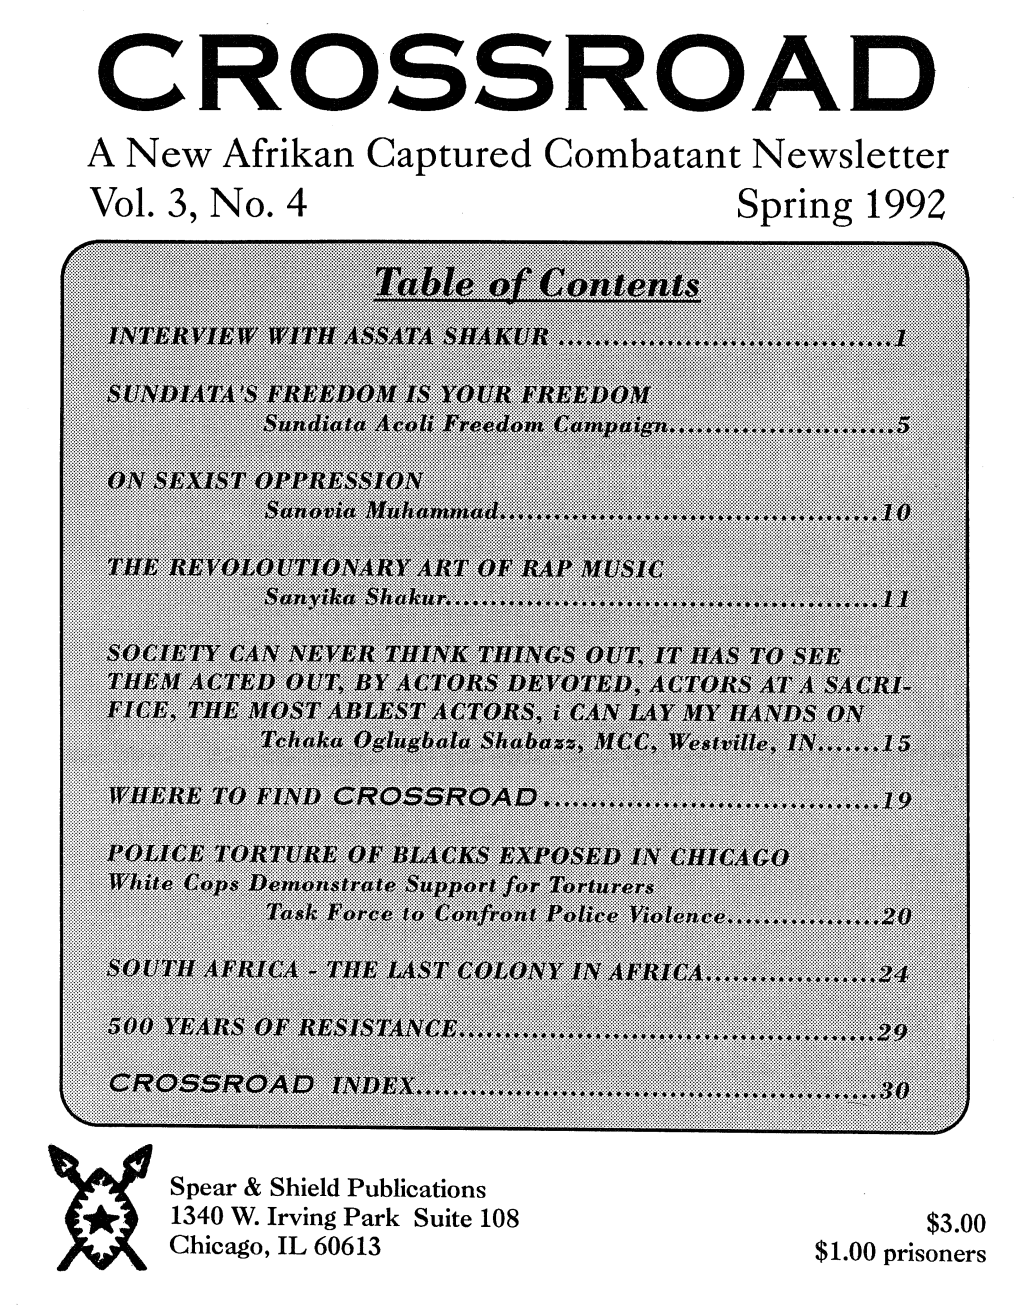 A New Afrikan Captured Con1batant Newsletter Vol. 3, No. 4 Spring 1992